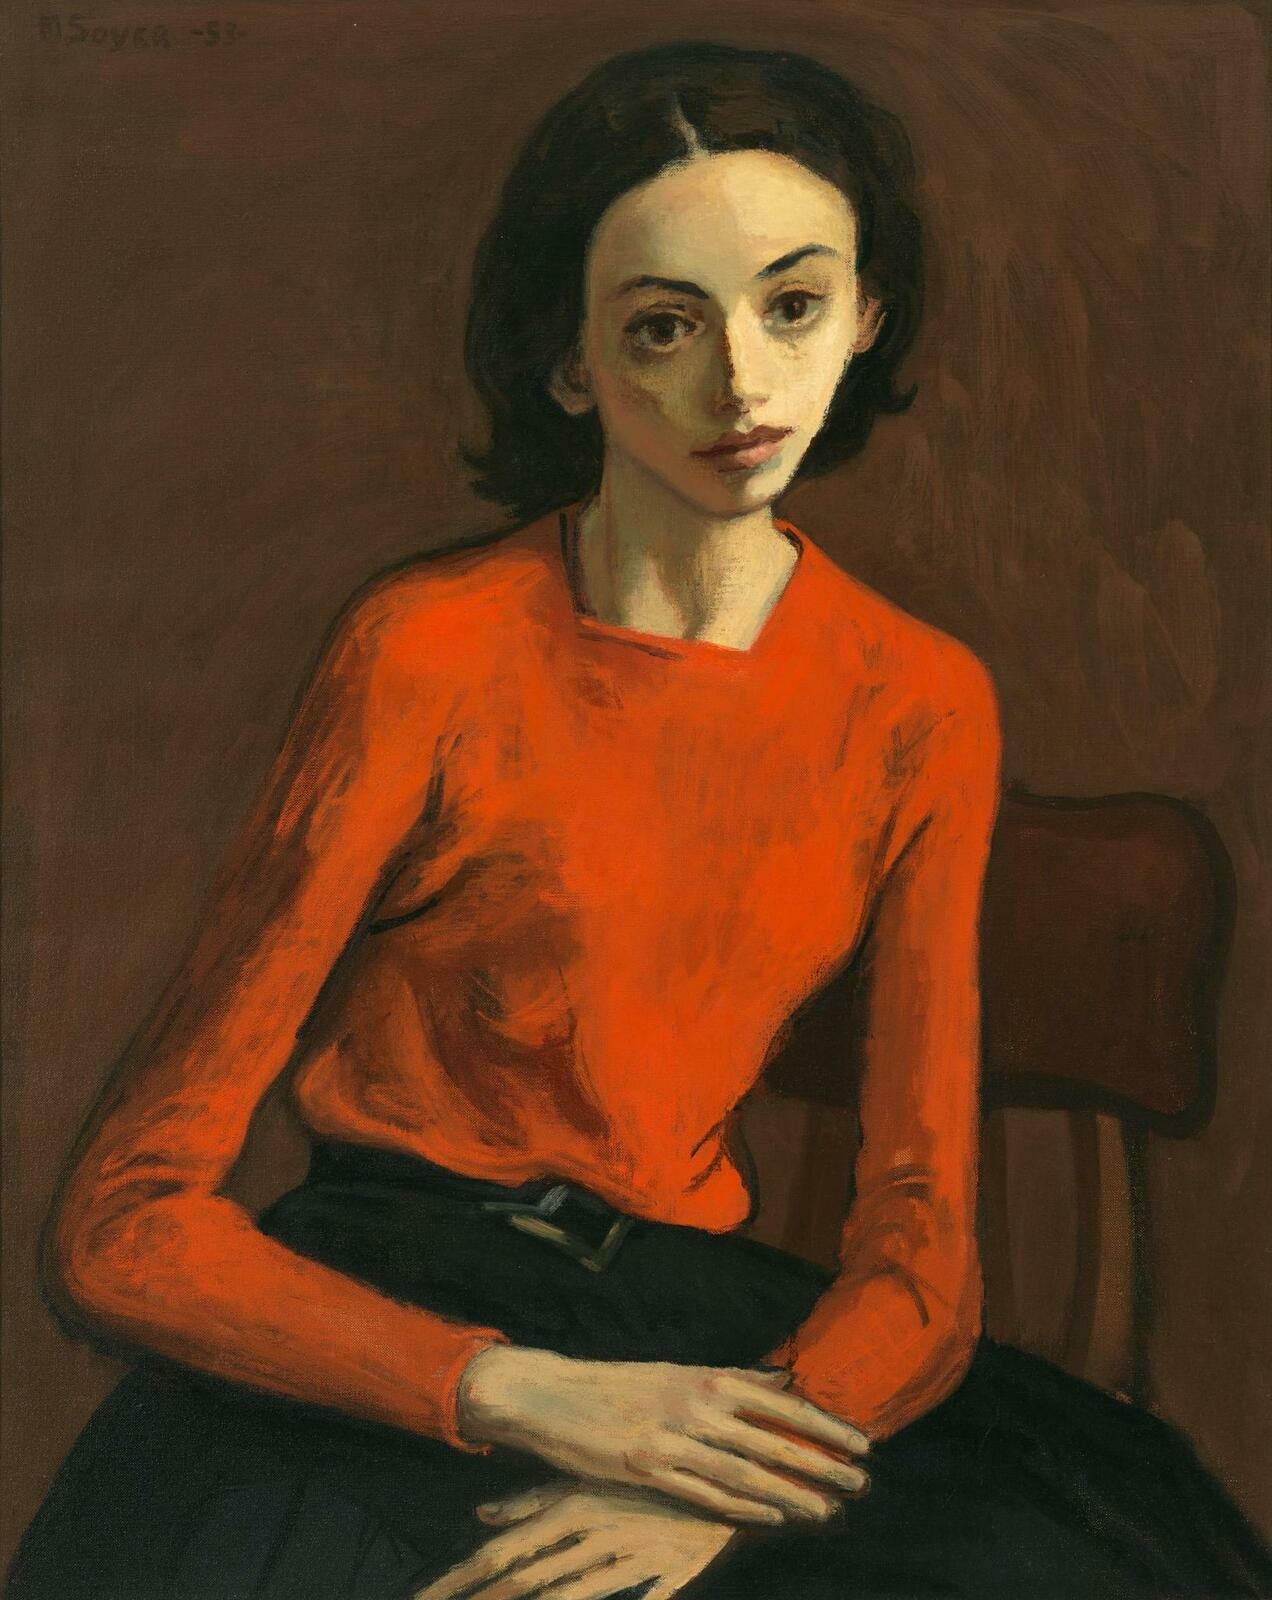 Moses Soyer | Girl in Orange Sweater | Whitney Museum of American Art